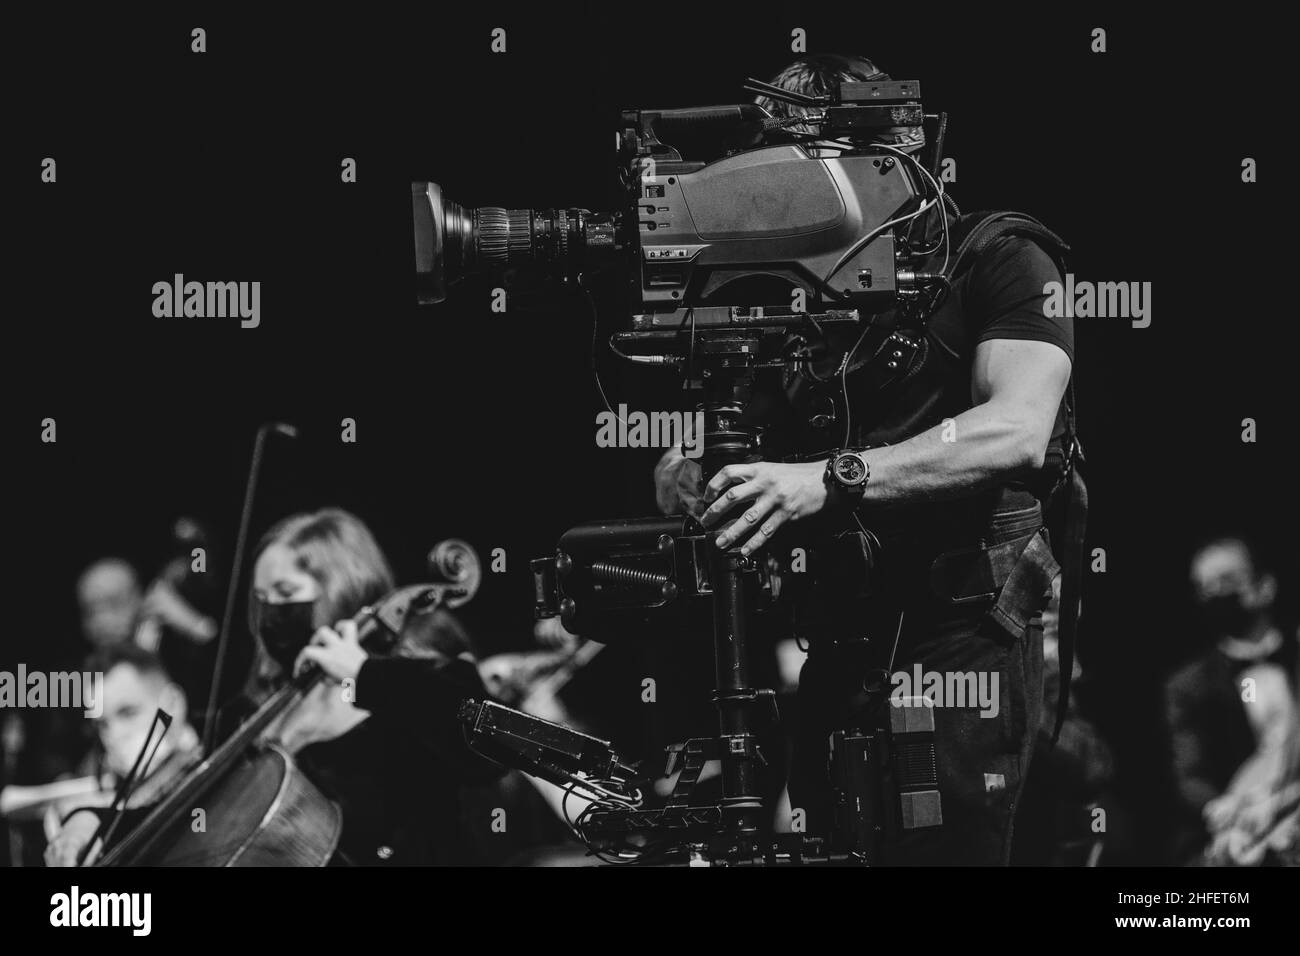 Bucharest, Romania - January 15, 2022: Professional steadicam (gimbal) operator filming a classical music concert. Stock Photo